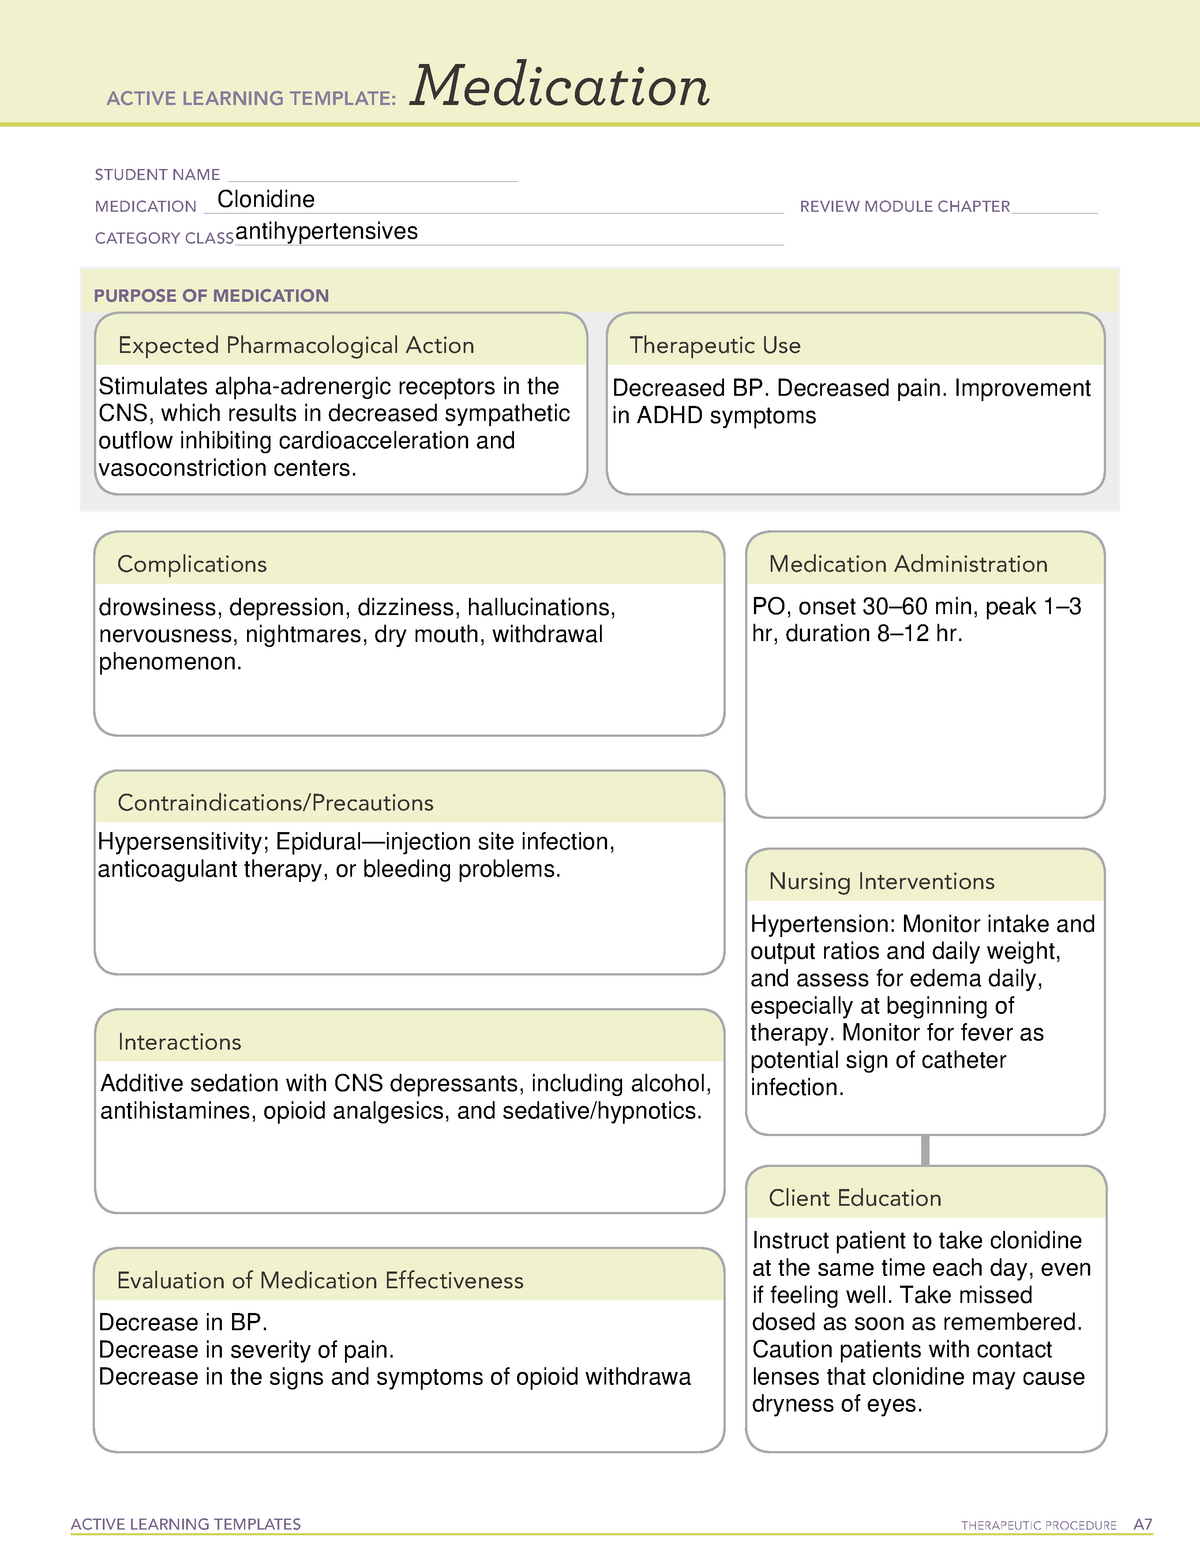 Clonidine ACTIVE LEARNING TEMPLATES THERAPEUTIC PROCEDURE A